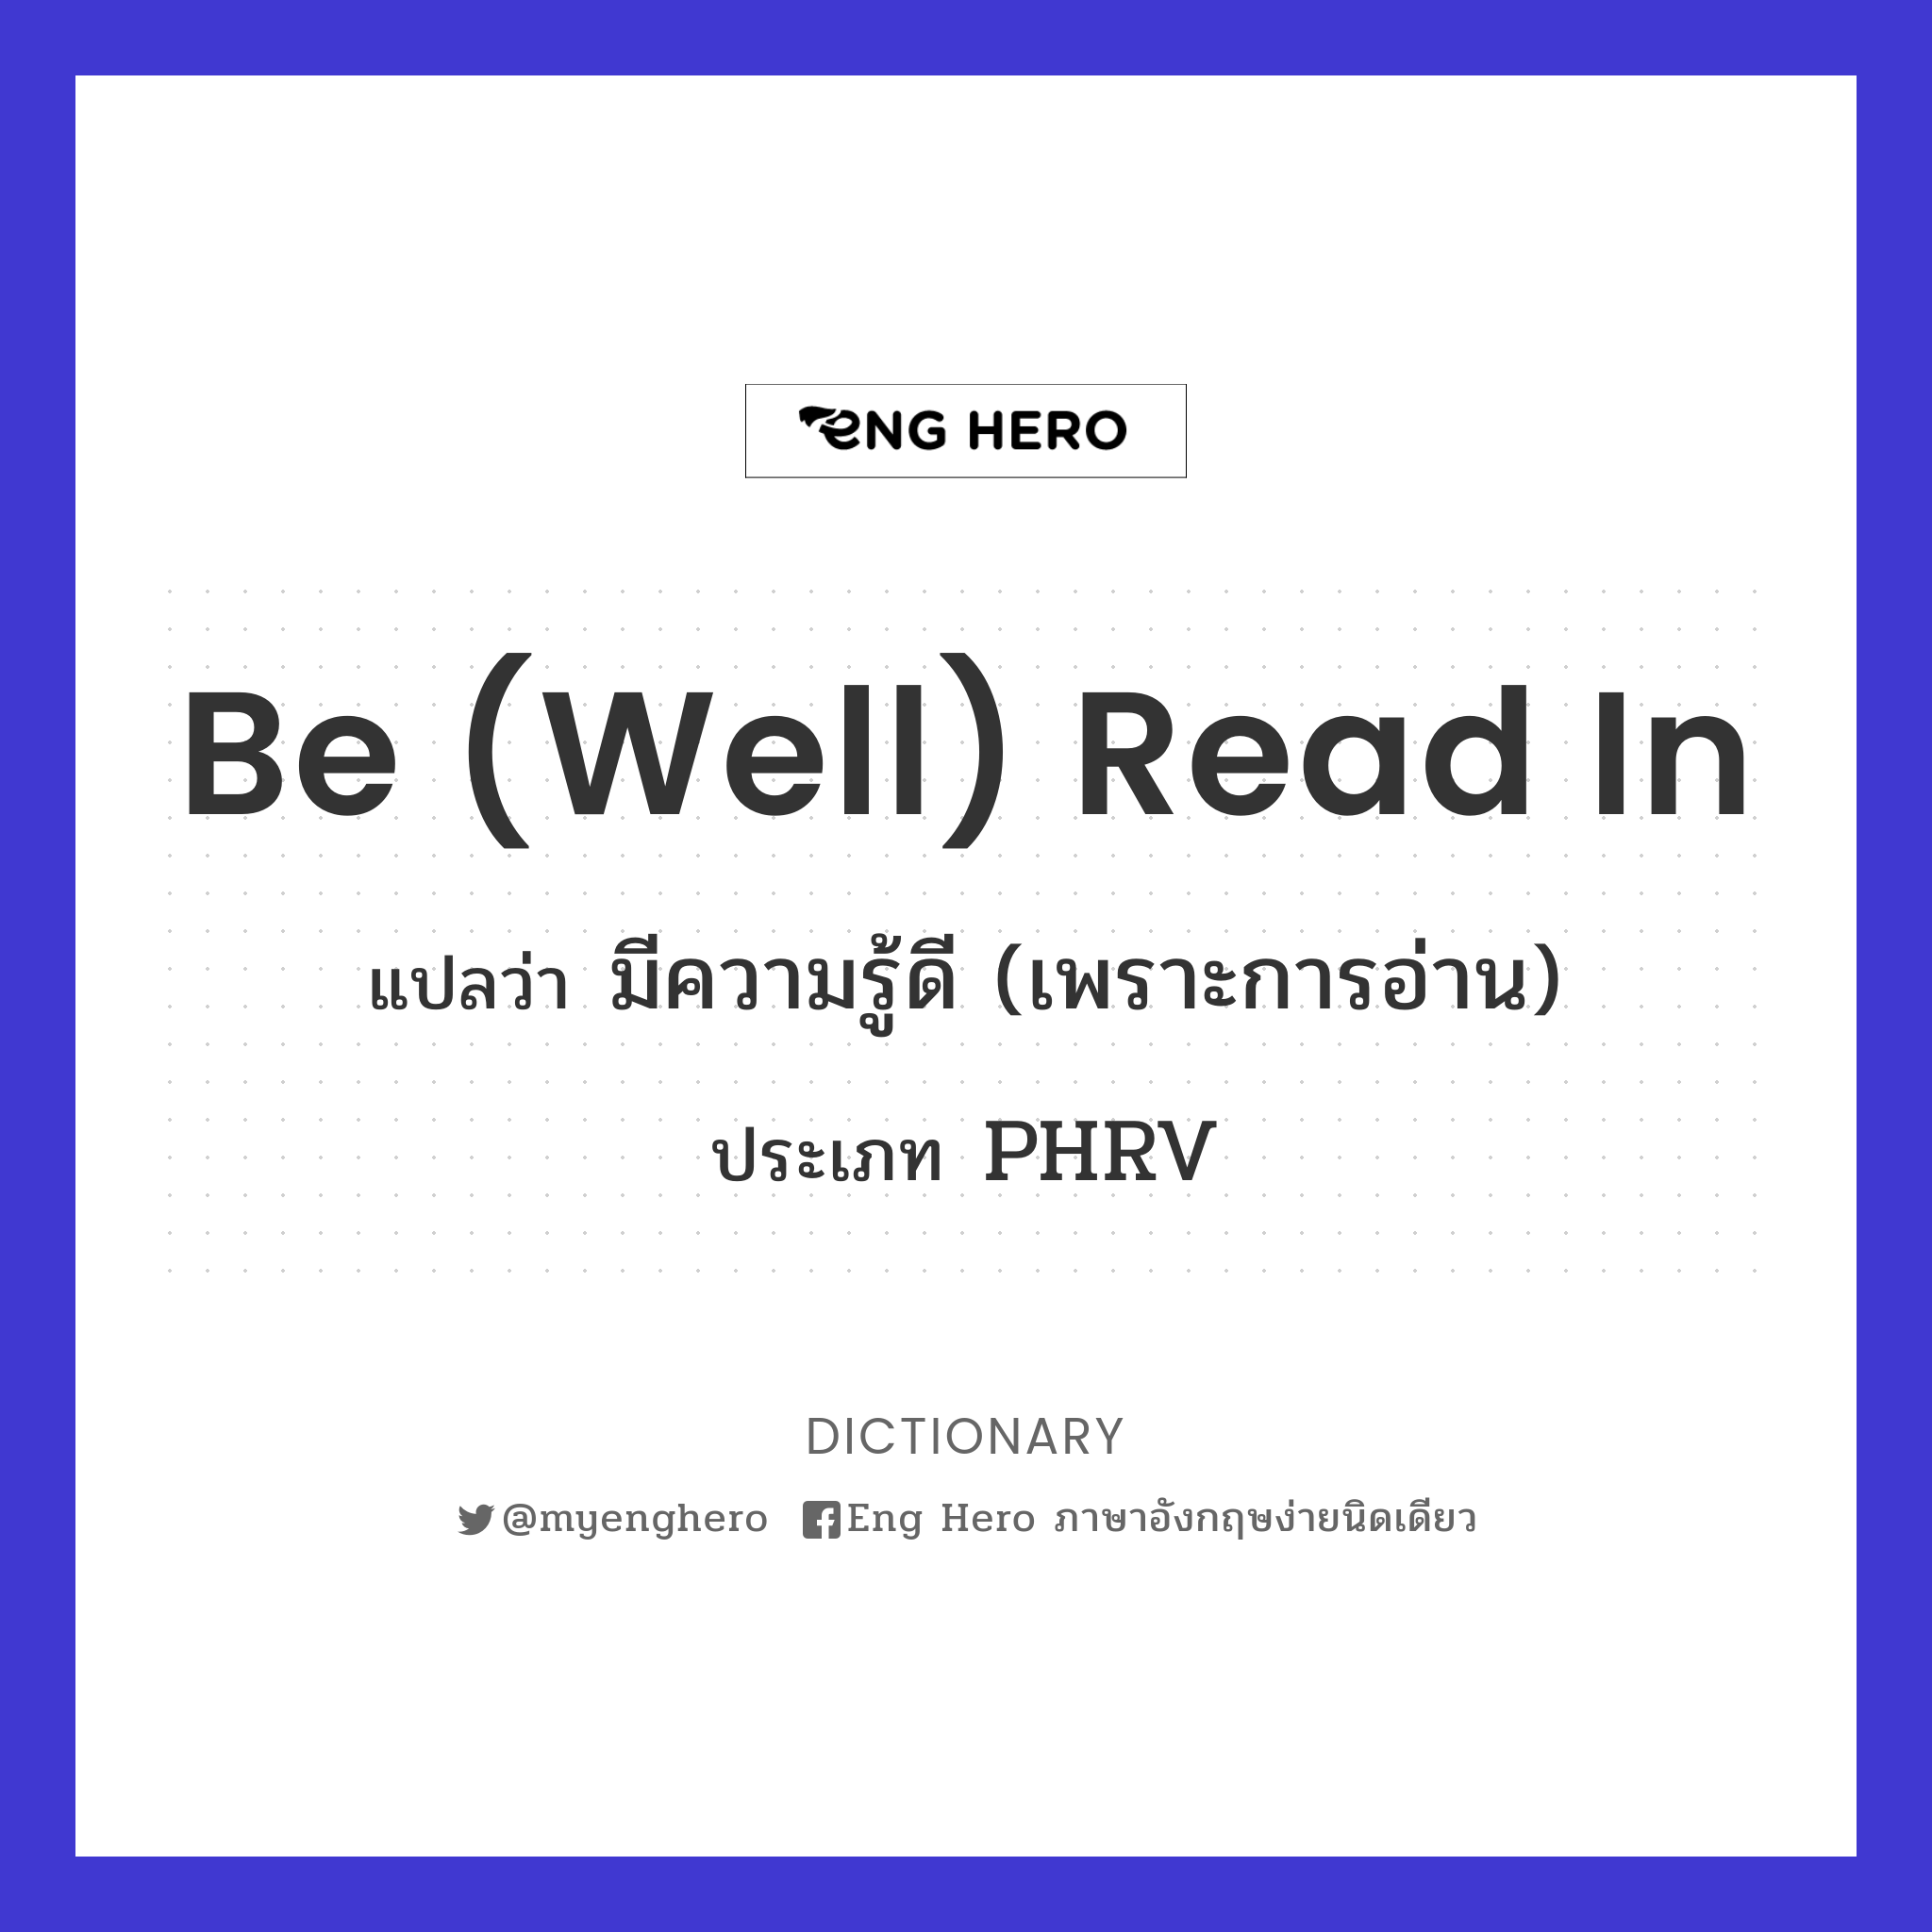 be (well) read in